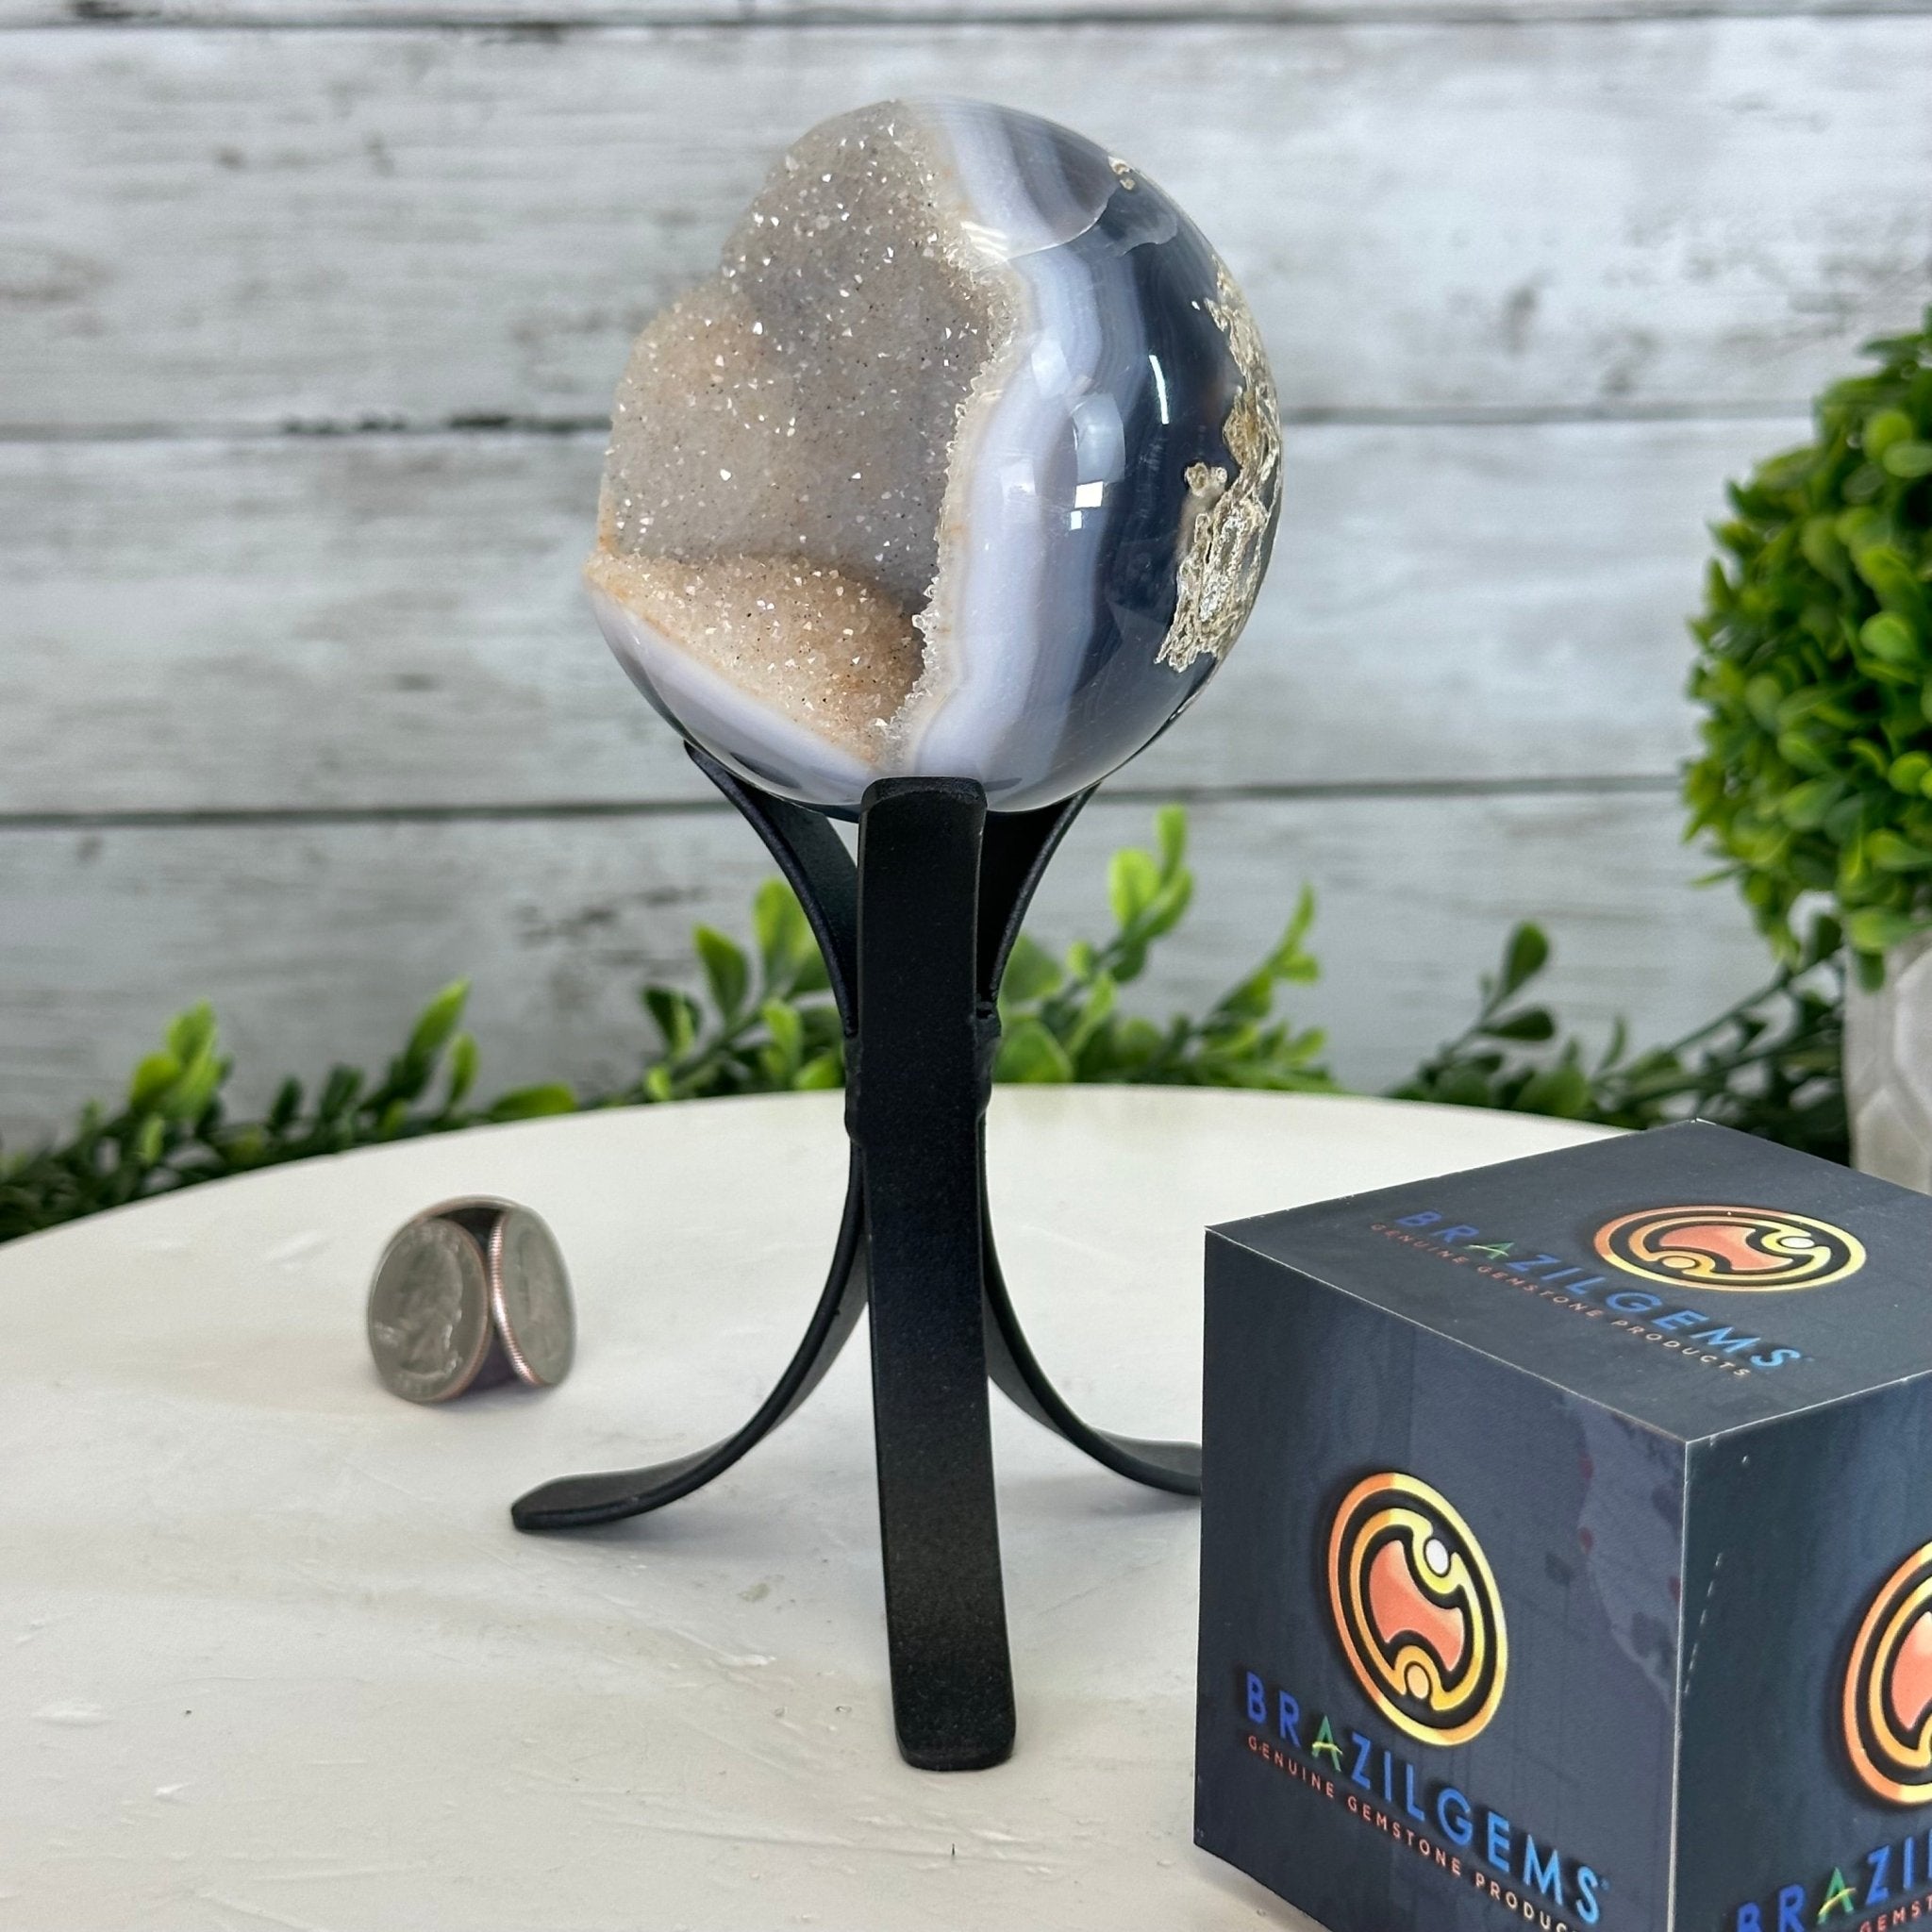 Druzy Agate Sphere on a Metal Stand, 1 lbs & 6.8" Tall #5634-0004 - Brazil GemsBrazil GemsDruzy Agate Sphere on a Metal Stand, 1 lbs & 6.8" Tall #5634-0004Spheres5634-0004